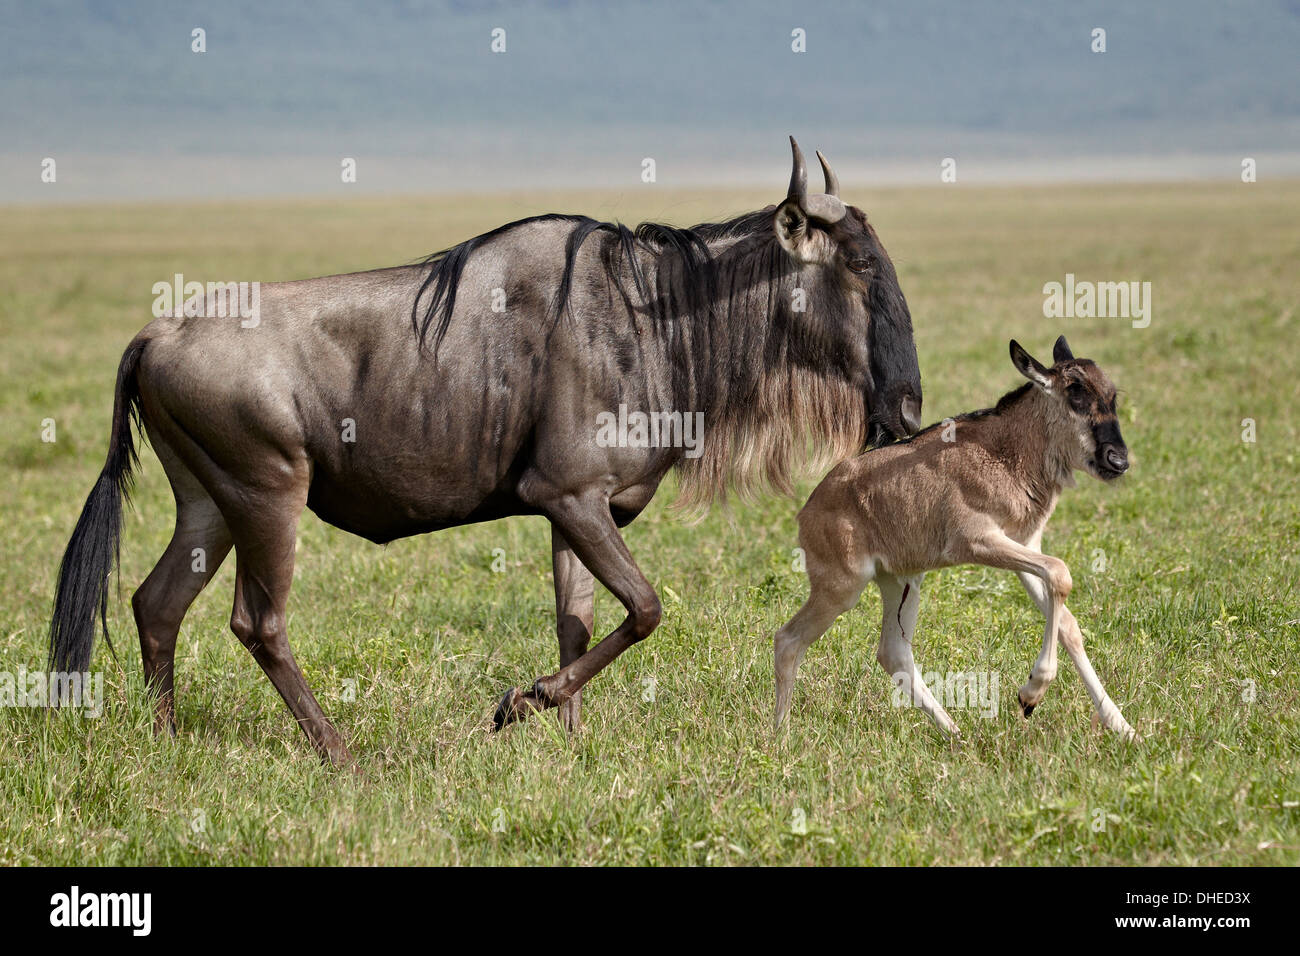 Blue wildebeest (Connochaetes taurinus) cow and days-old calf running, Ngorongoro Crater, Tanzania, East Africa, Africa Stock Photo